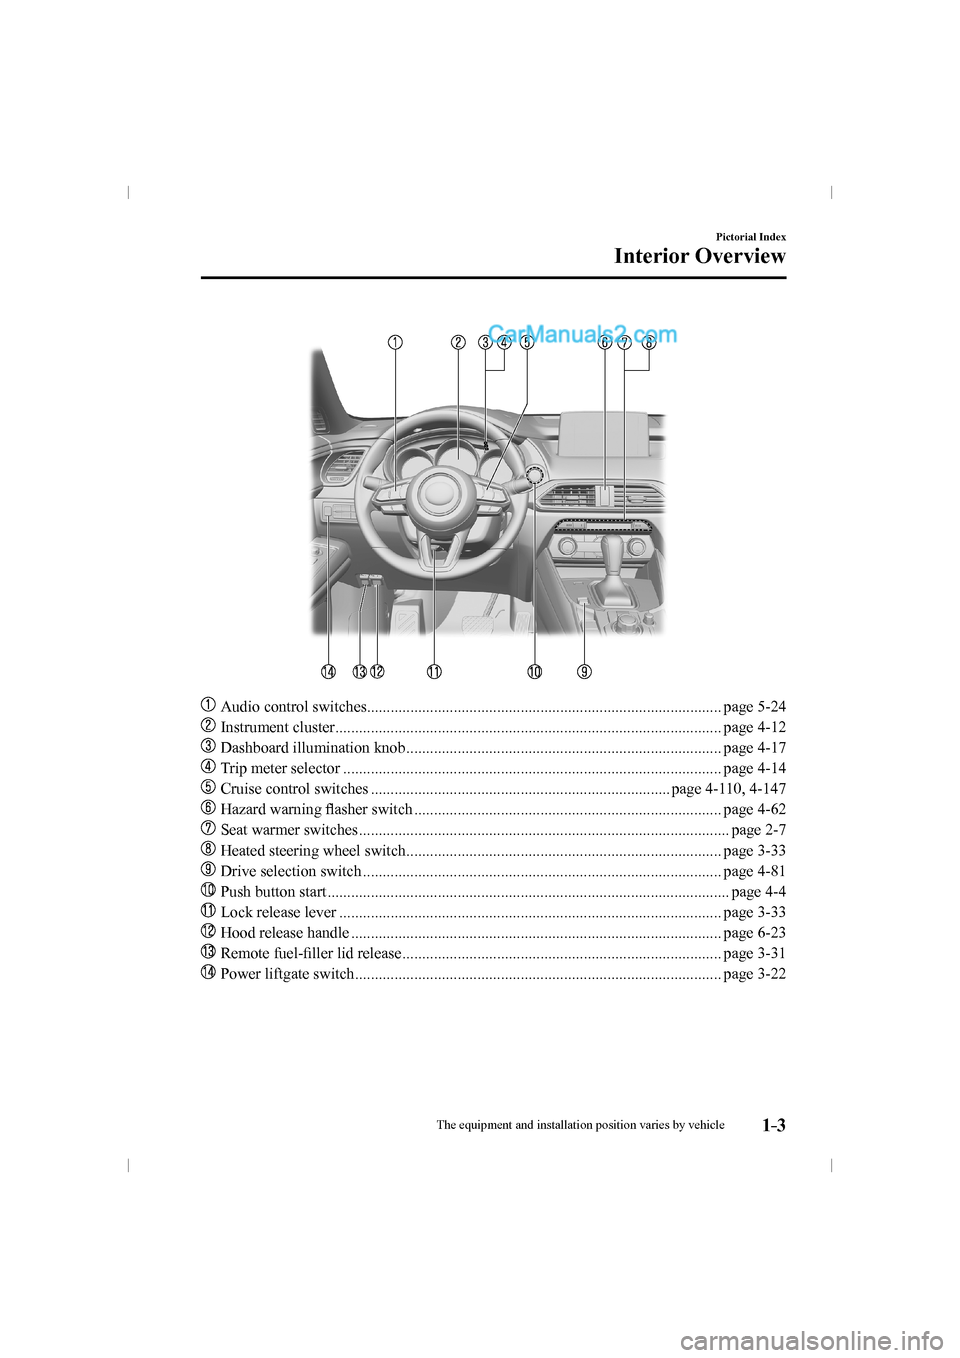 MAZDA MODEL CX-9 2016  Owners Manual (in English) 1–3
Pictorial Index
Interior Overview
   
���
  Audio control switches.......................................................................................... page  5-24 
��
  Instrument clus